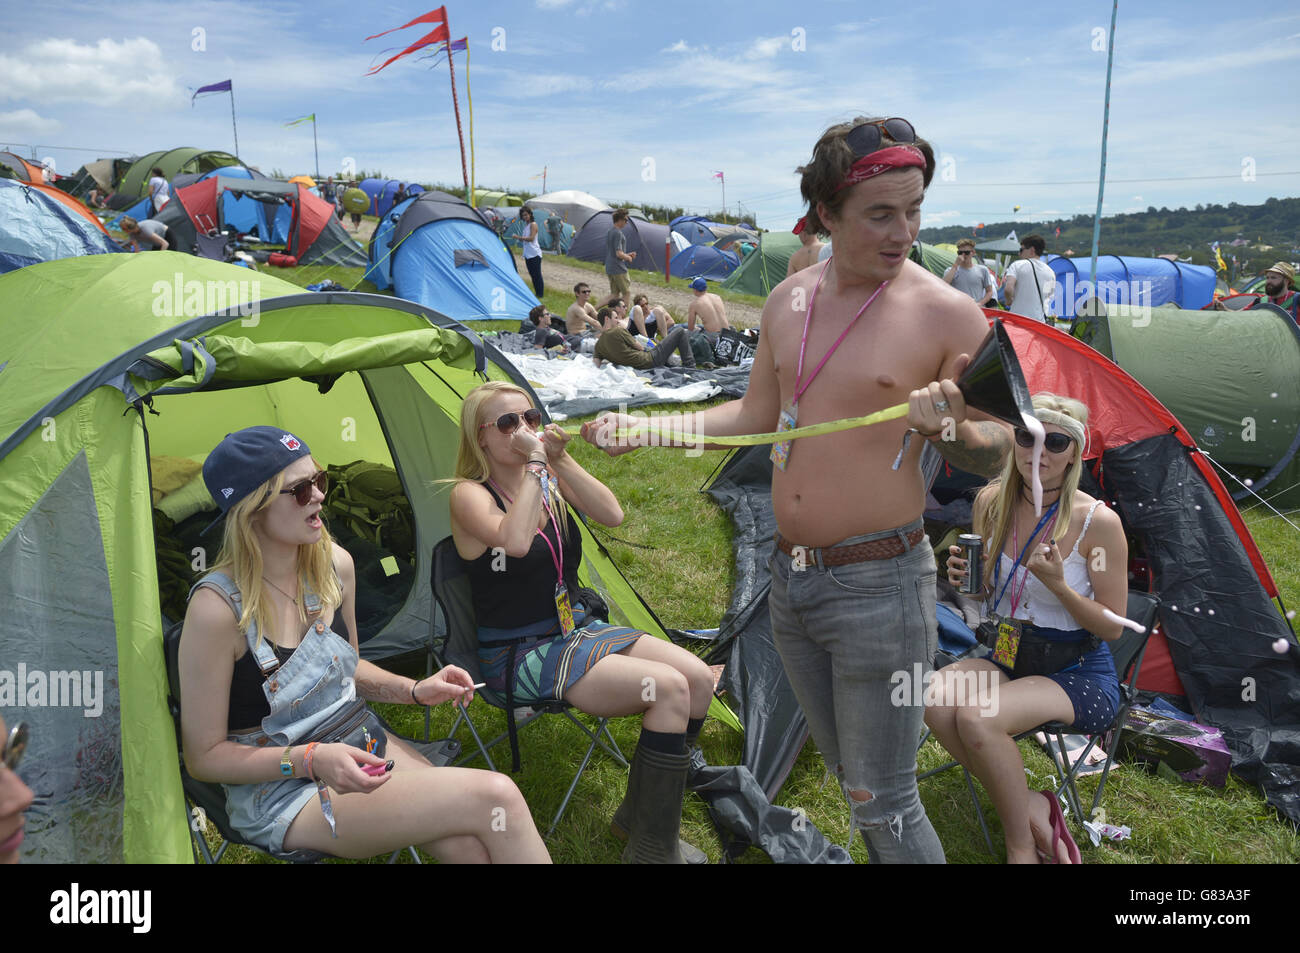 Chloe, 22, (surname not given) drunks fruit cider through a funnel and tube, also known as 'chugging' at the Glastonbury Festival, at Worthy Farm in Somerset. Stock Photo